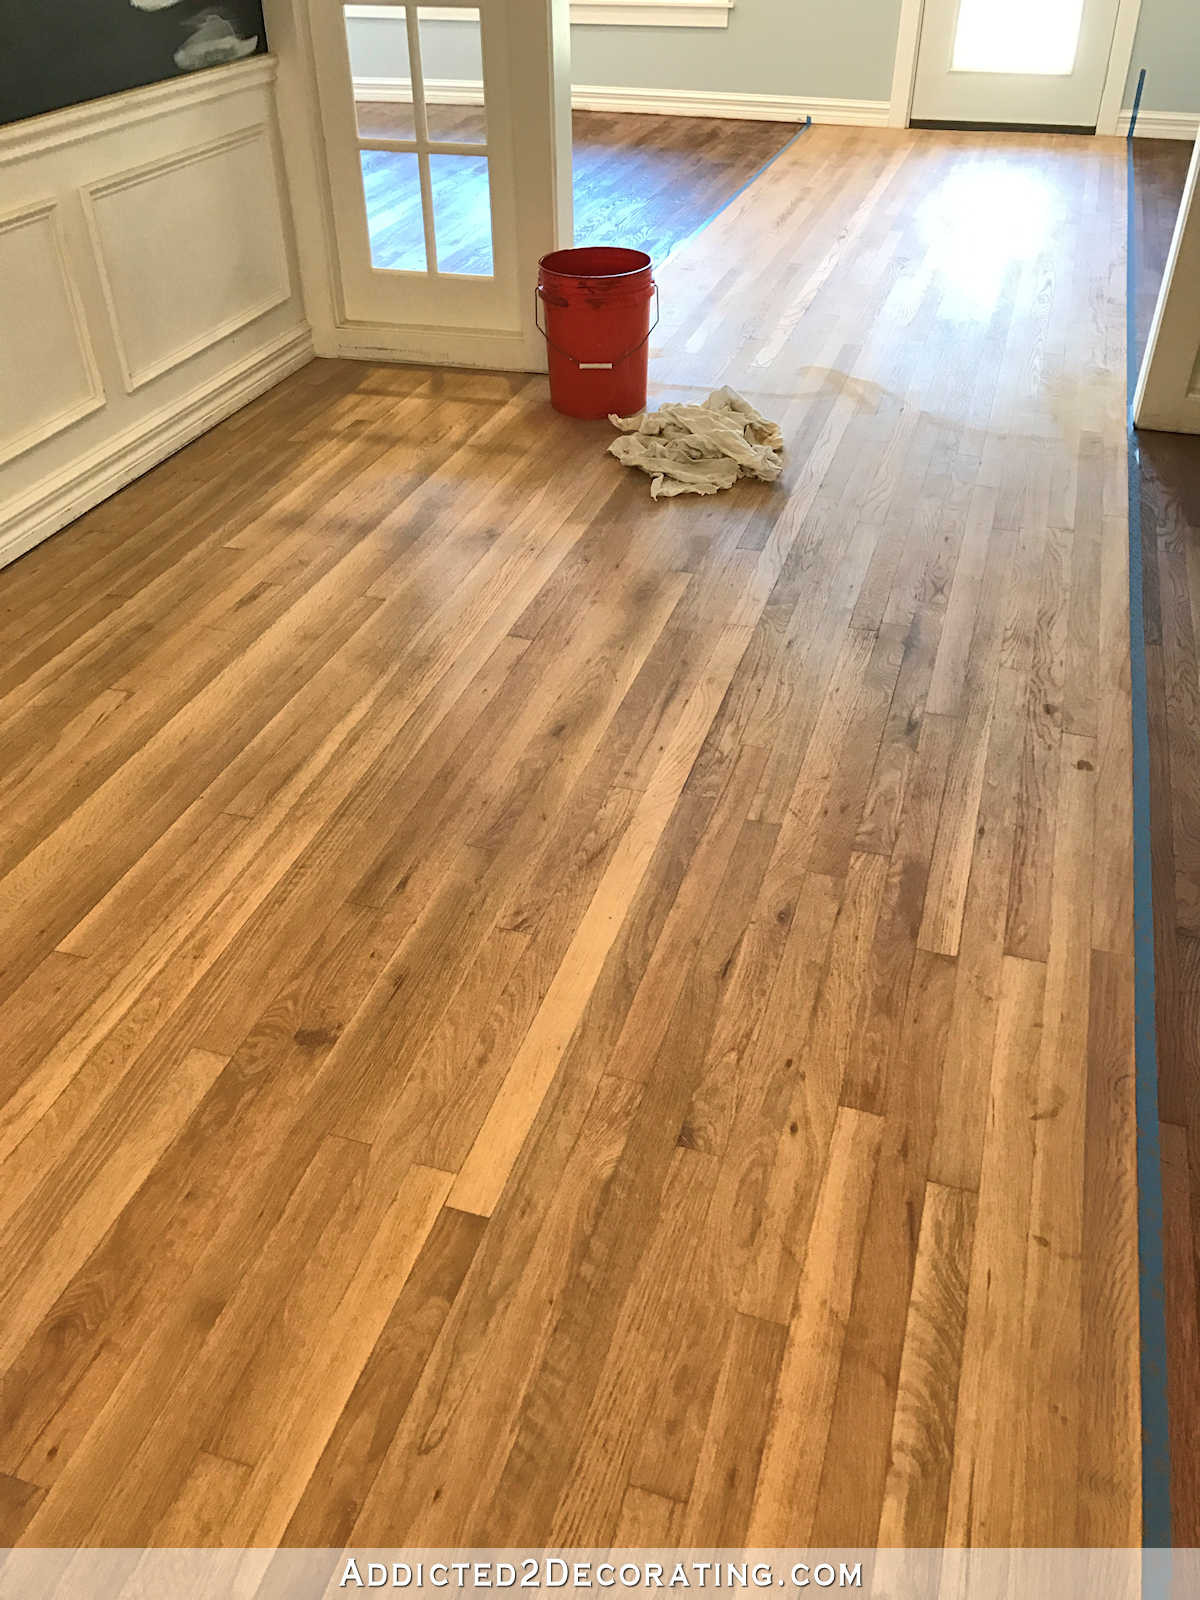 16 Awesome Cost to Sand and Stain Hardwood Floors 2022 free download cost to sand and stain hardwood floors of adventures in staining my red oak hardwood floors products process with regard to staining red oak hardwood floors 8 entryway and music room wood co